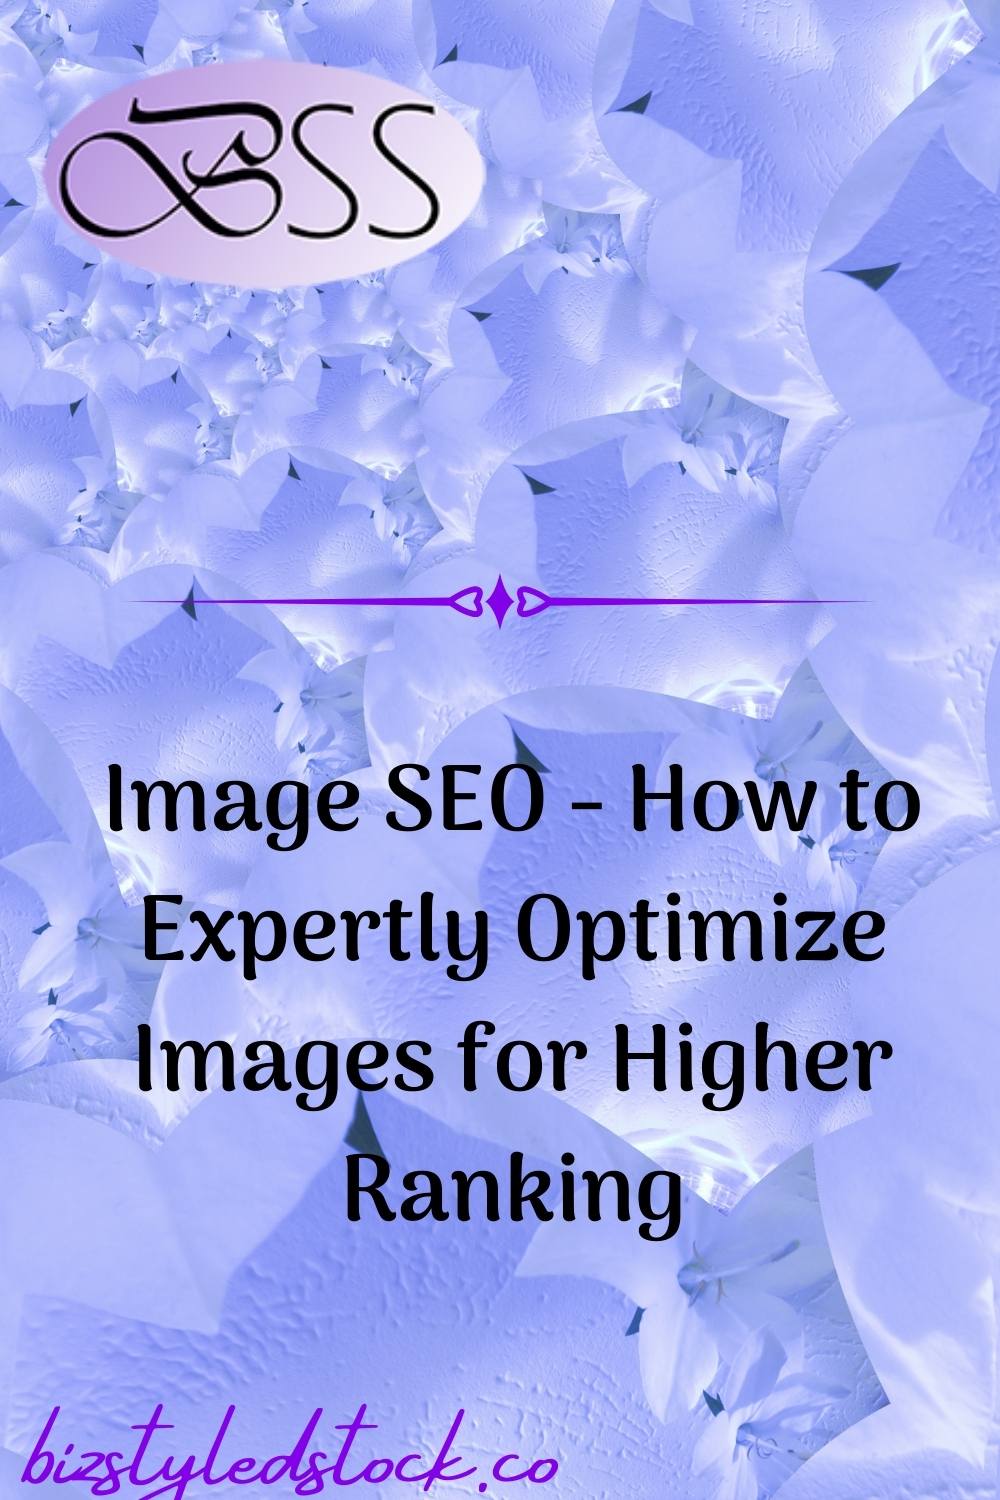 Image SEO - How to Expertly Optimize Images for Higher Ranking #imageseo seo background image